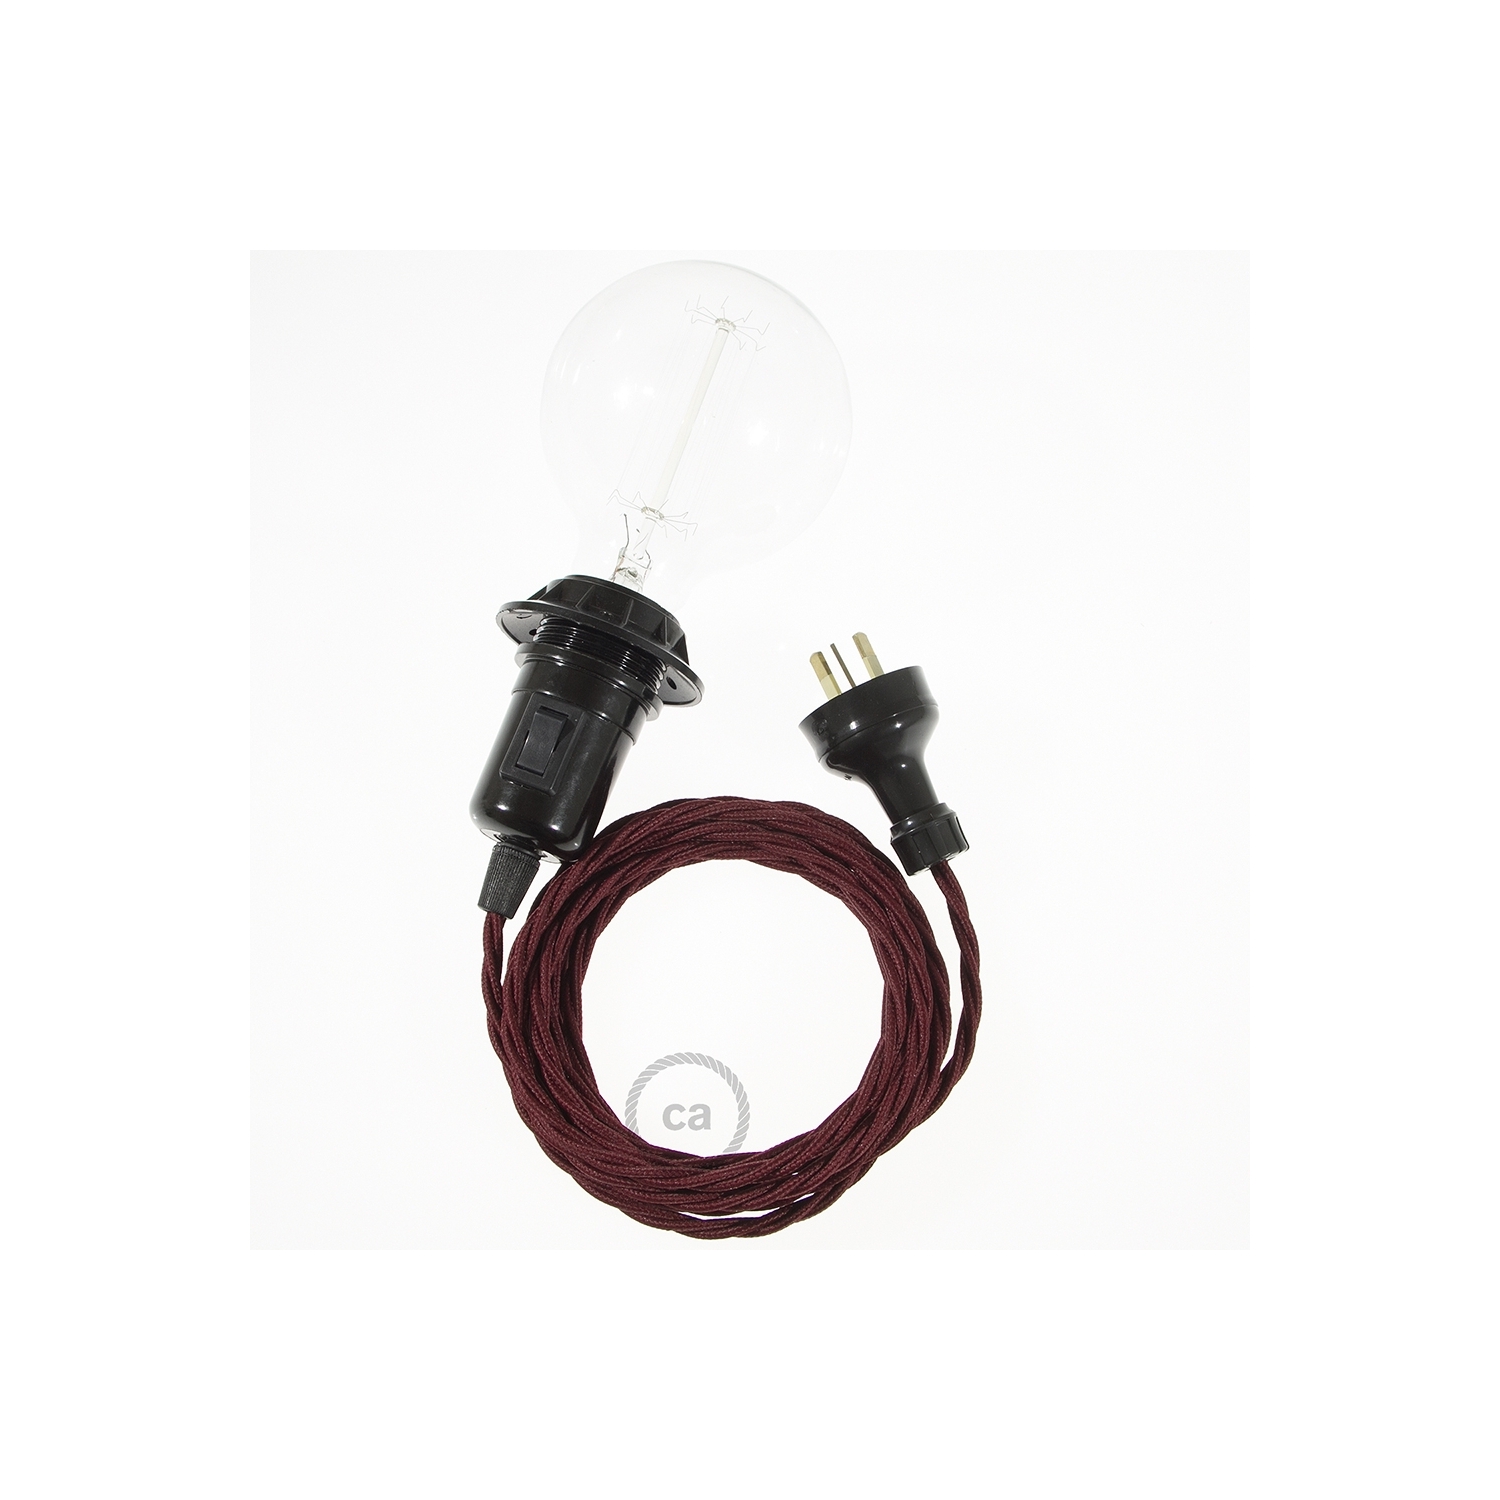 Create your TM19 Burgundy Rayon Snake for lampshade and bring the light wherever you want.